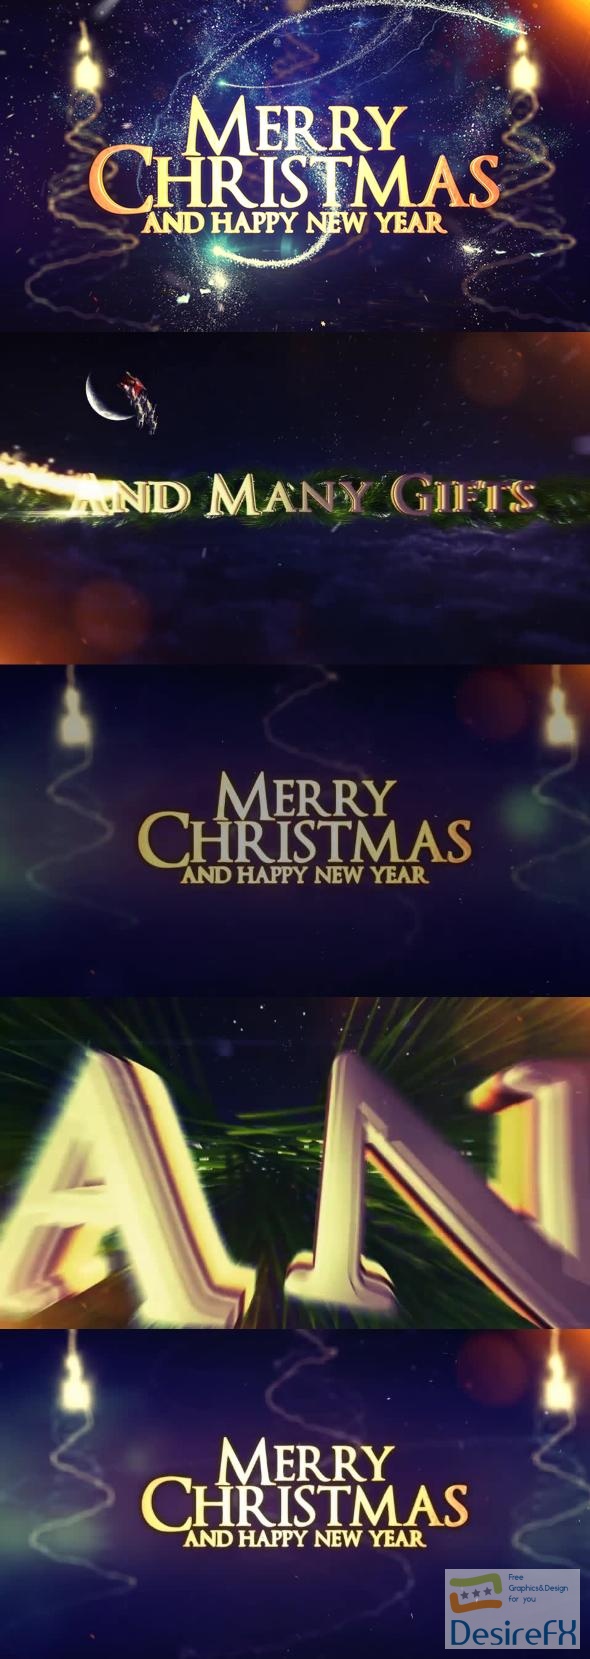 VideoHive Christmas Titles Opener 41822131